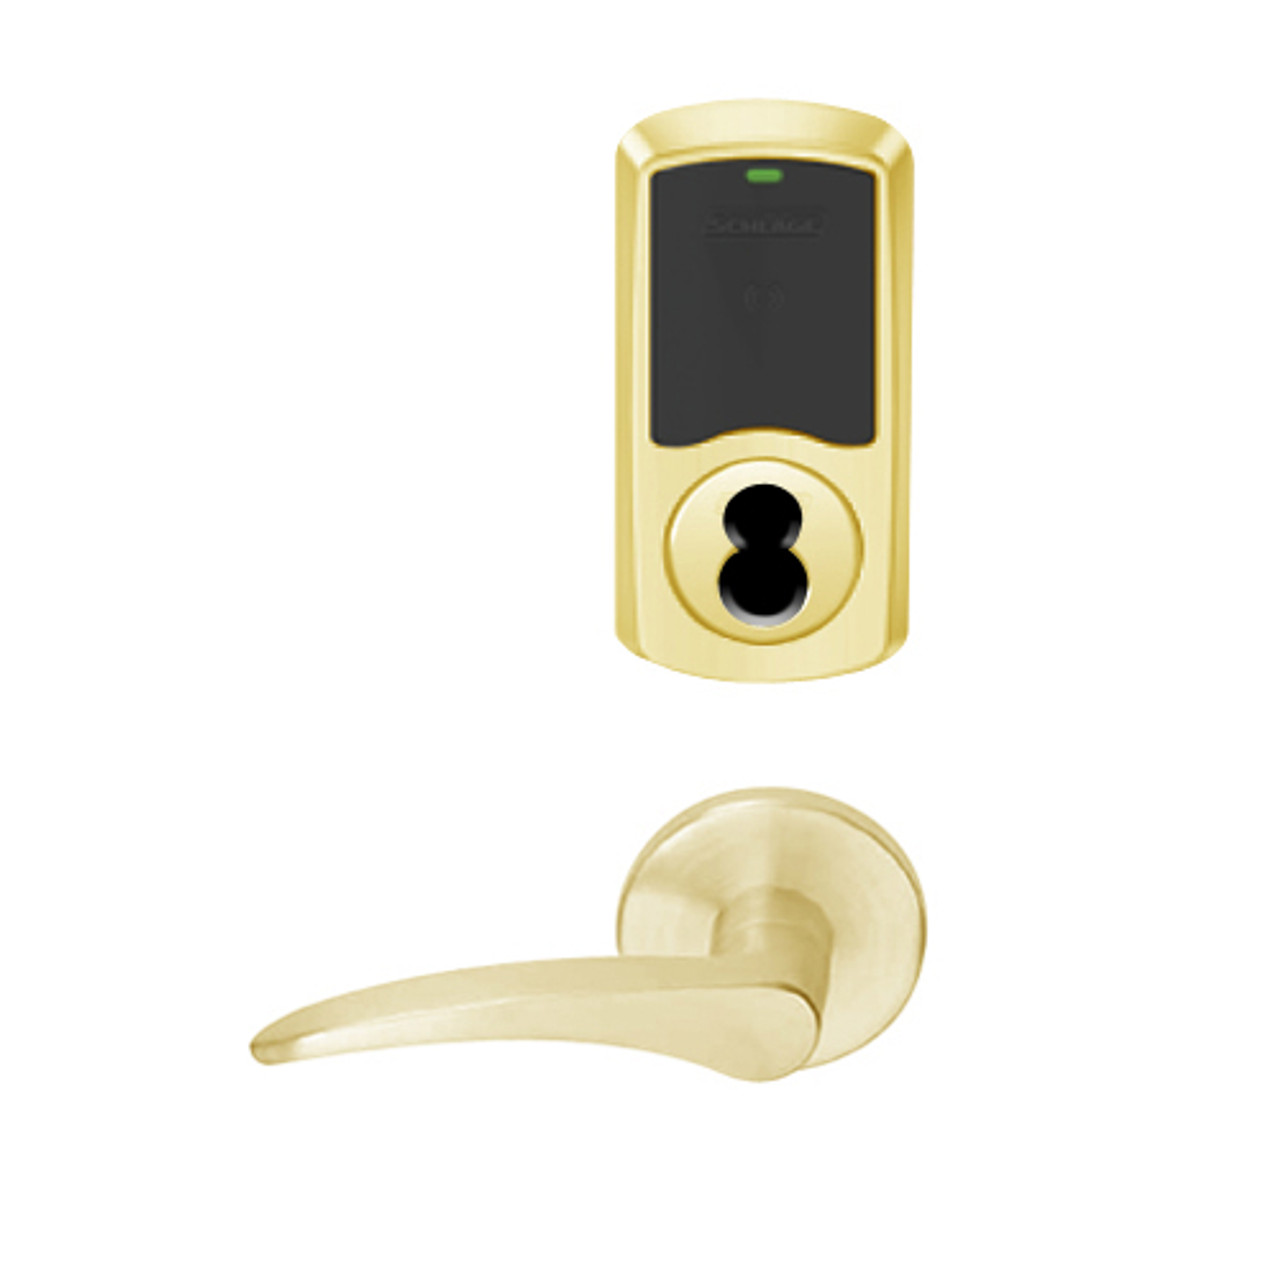 LEMD-GRW-J-12-605-00A-RH Schlage Privacy/Apartment Wireless Greenwich Mortise Deadbolt Lock with LED and 12 Lever Prepped for FSIC in Bright Brass